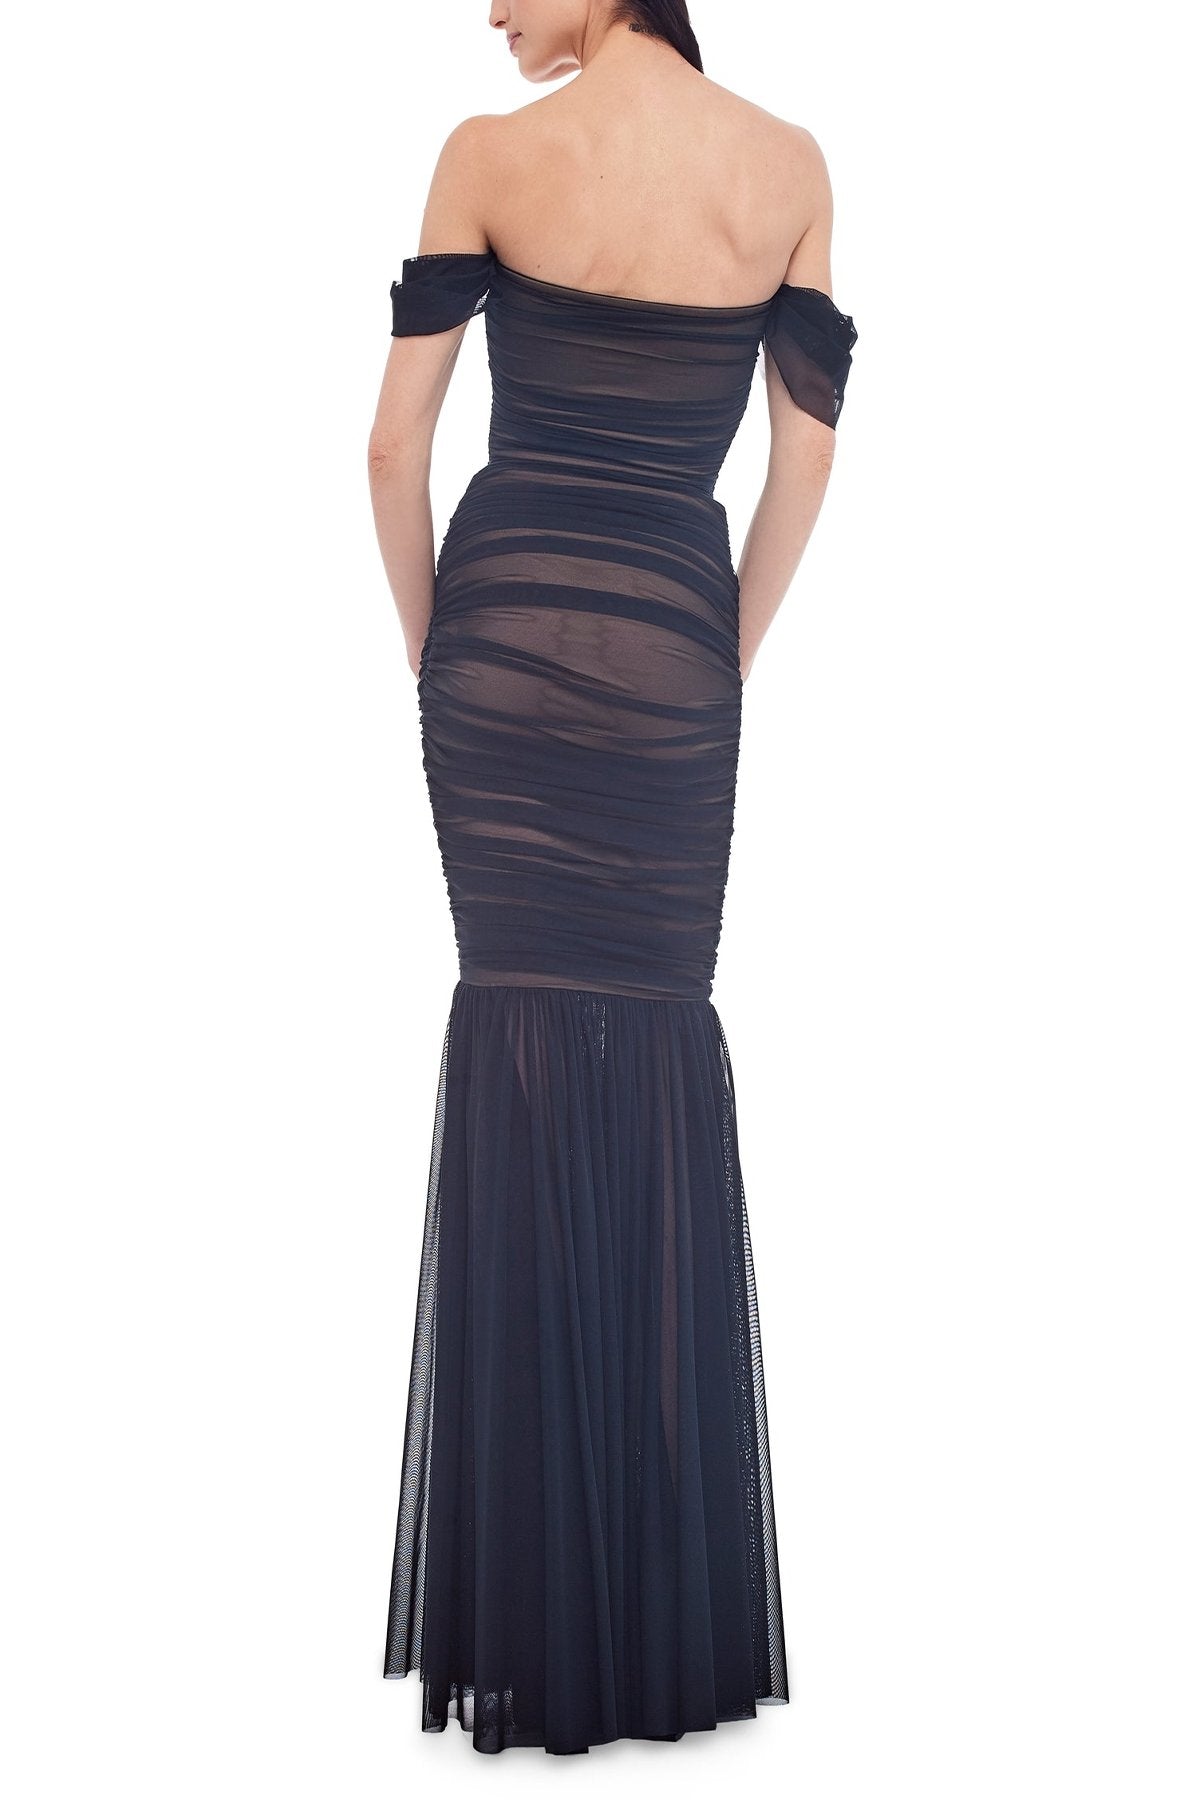 Walter Fishtail Gown in Black Mesh - shop-olivia.com